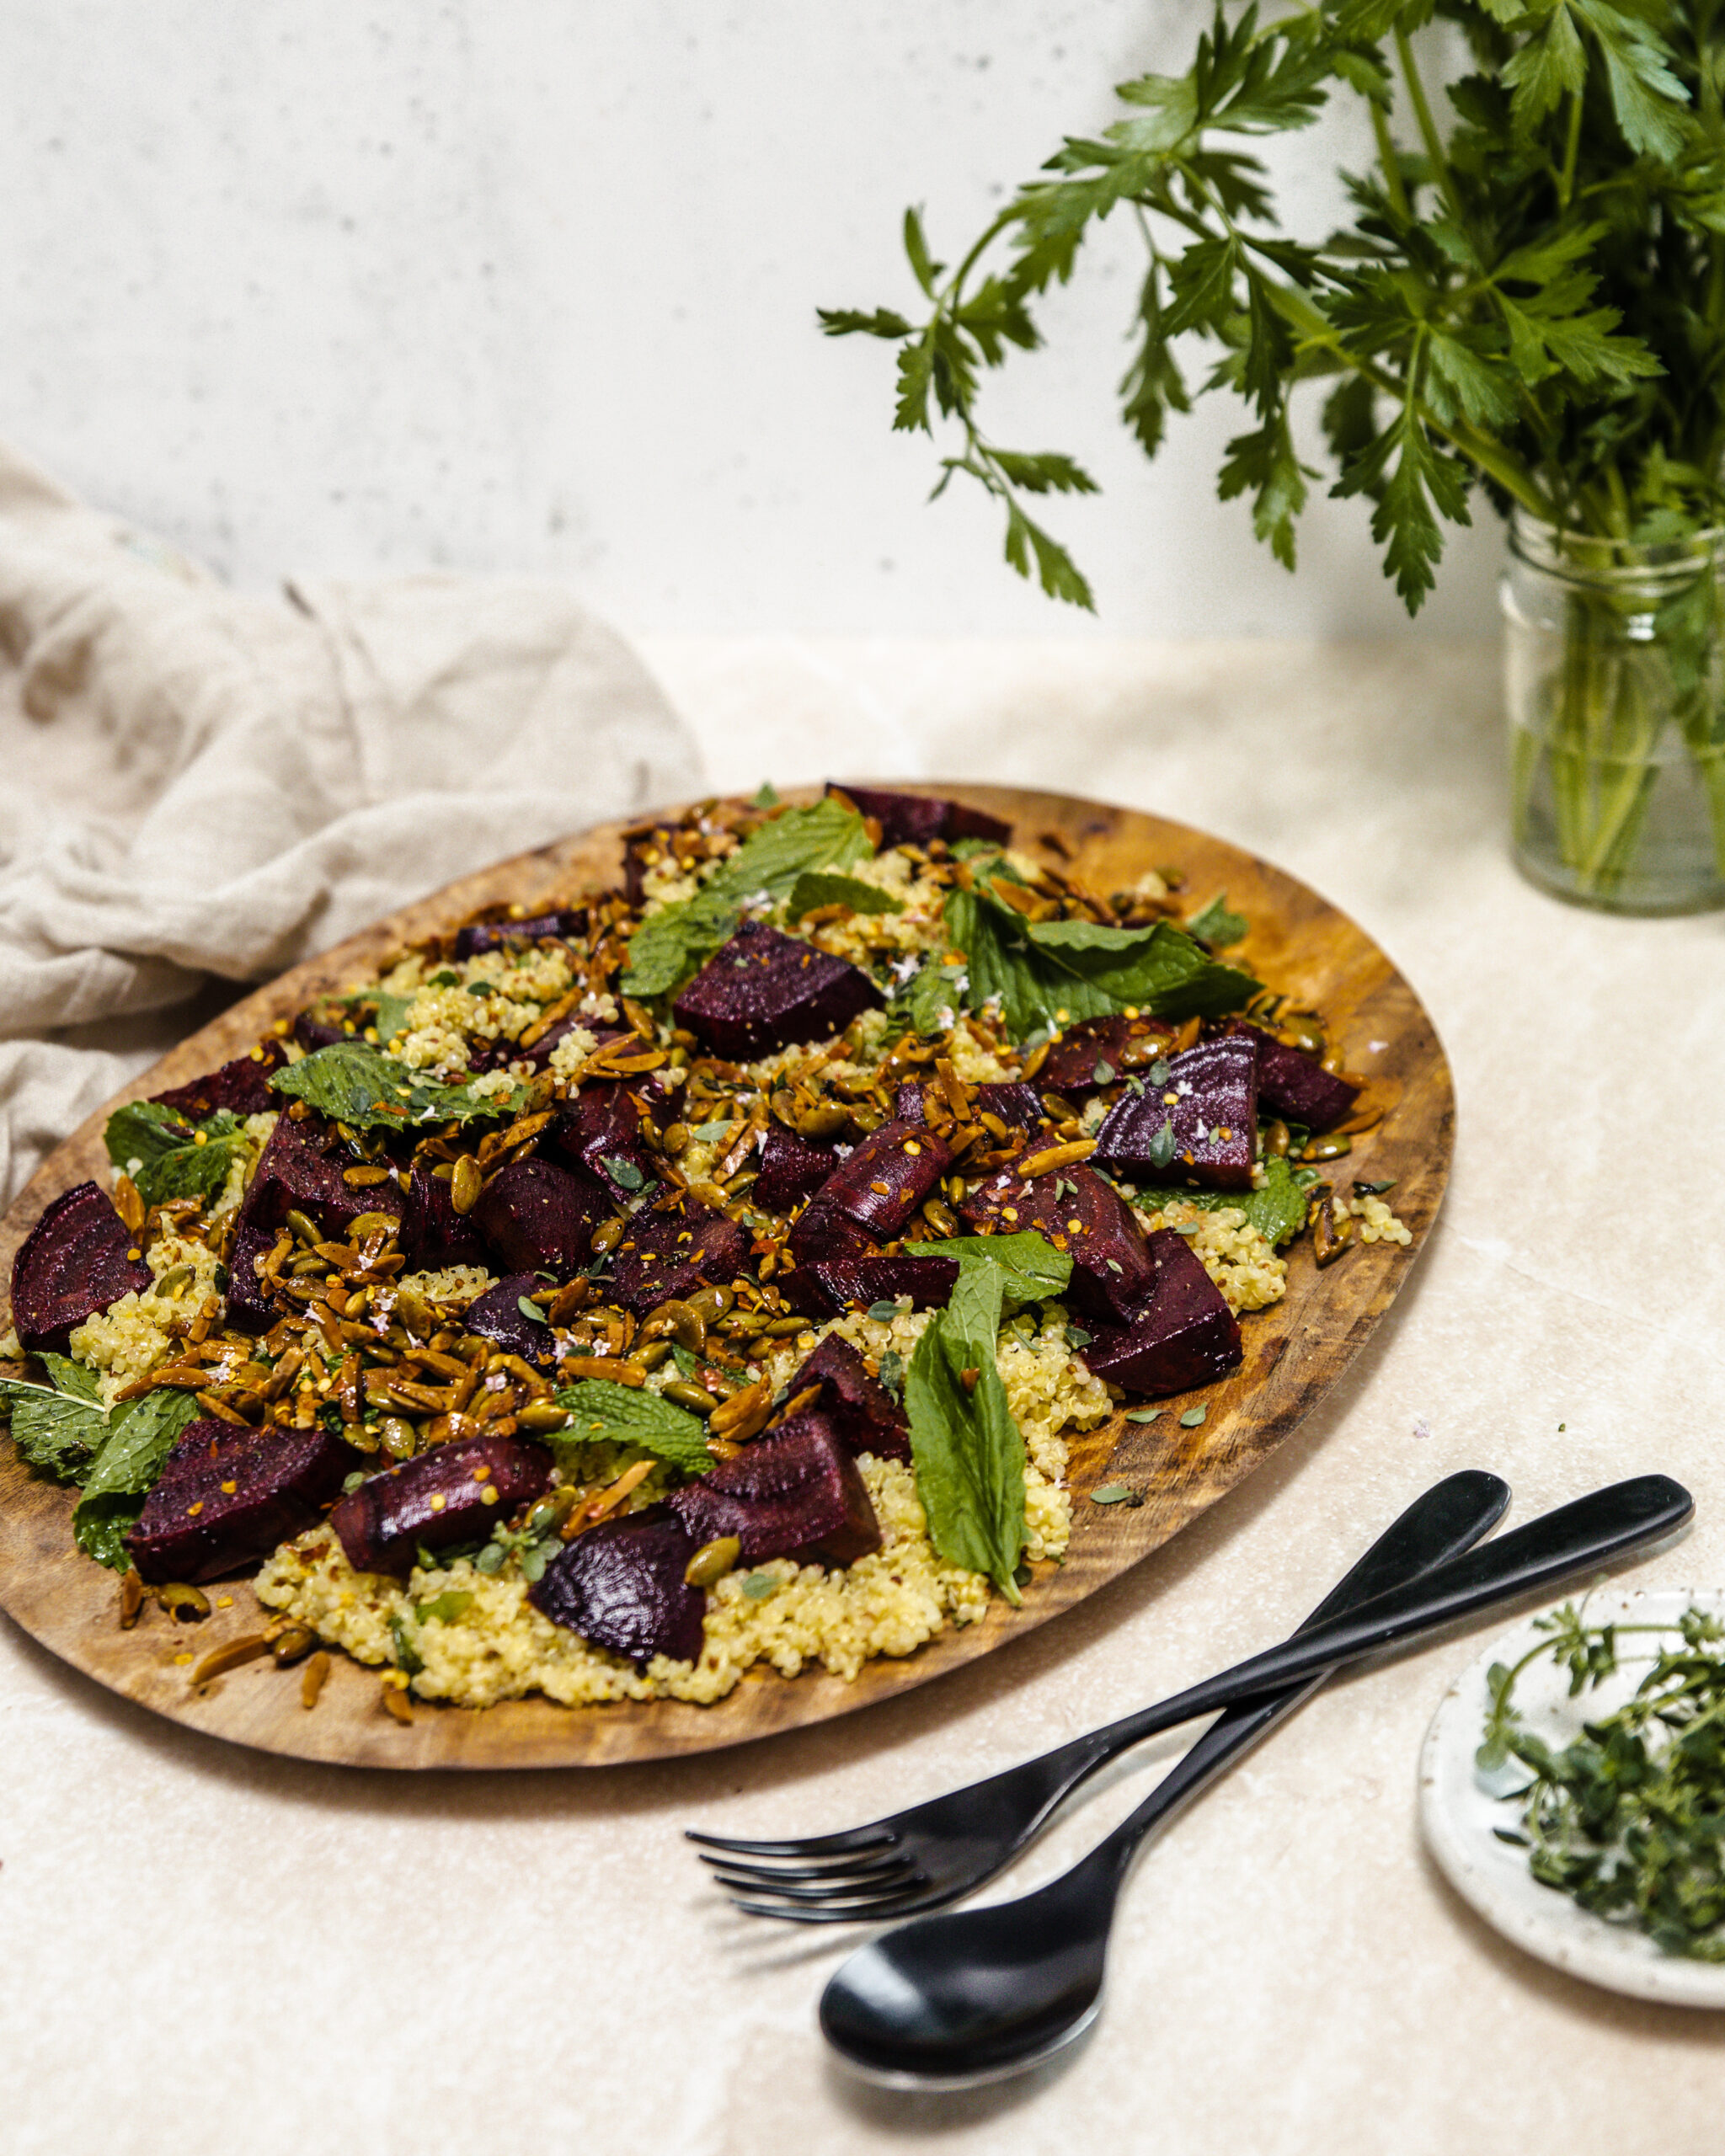 Beetroot, mint and maple crunch quinoa on a wooden serving board